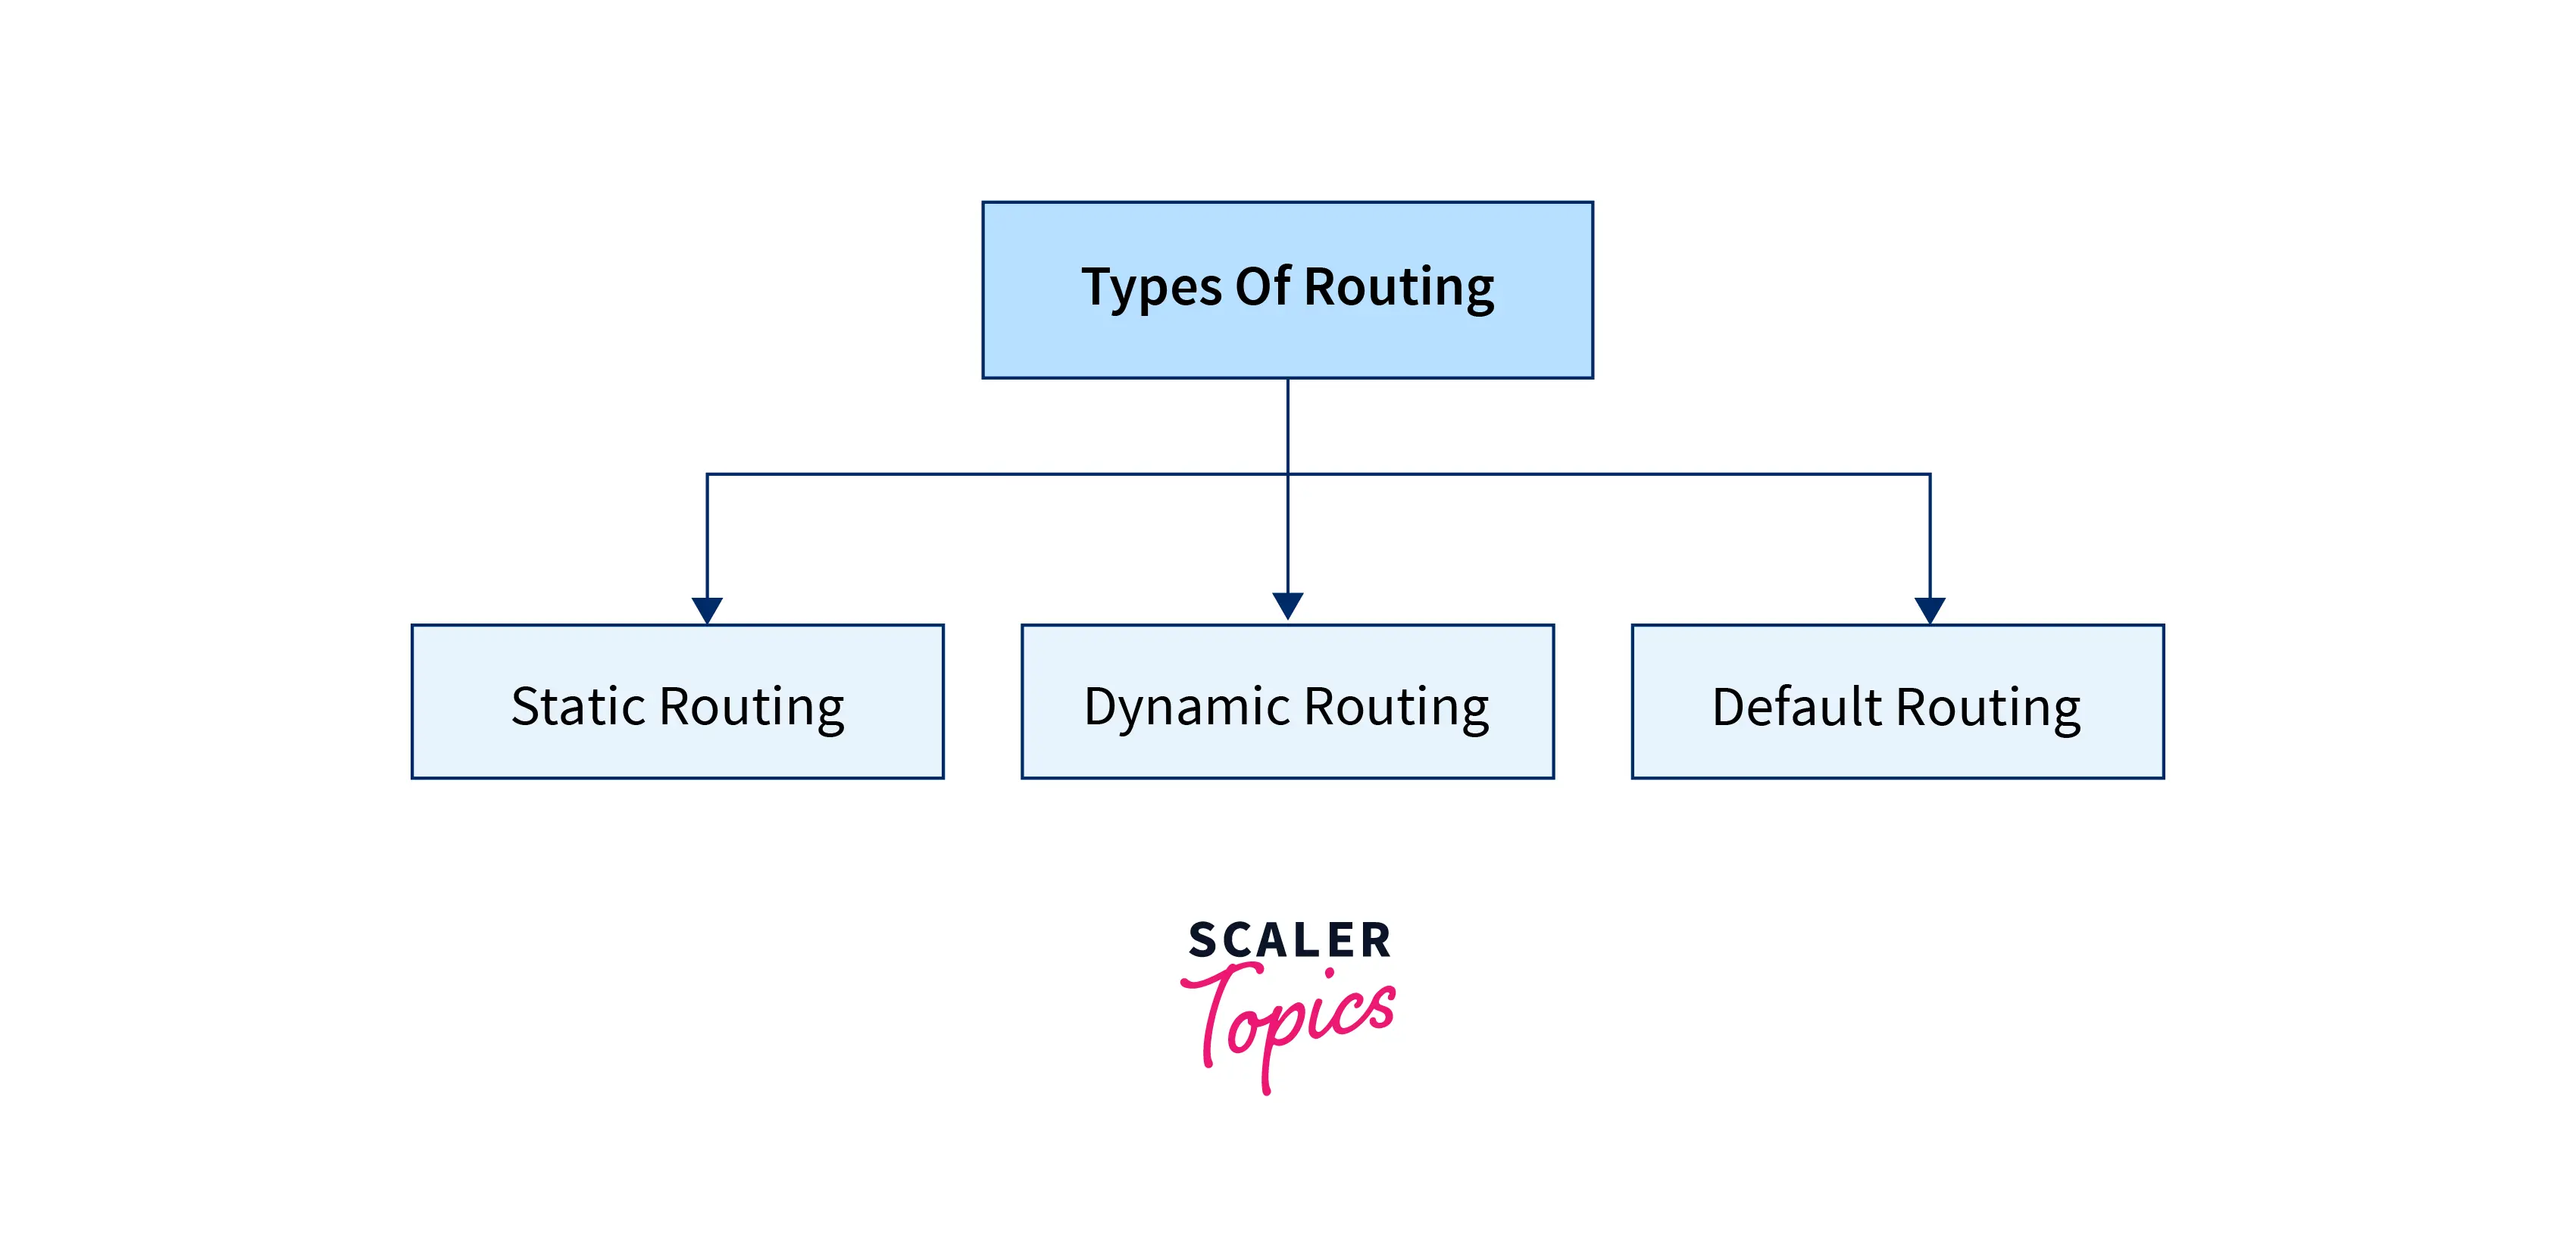 https://scaler.com/topics/images/types-of-routing1.webp